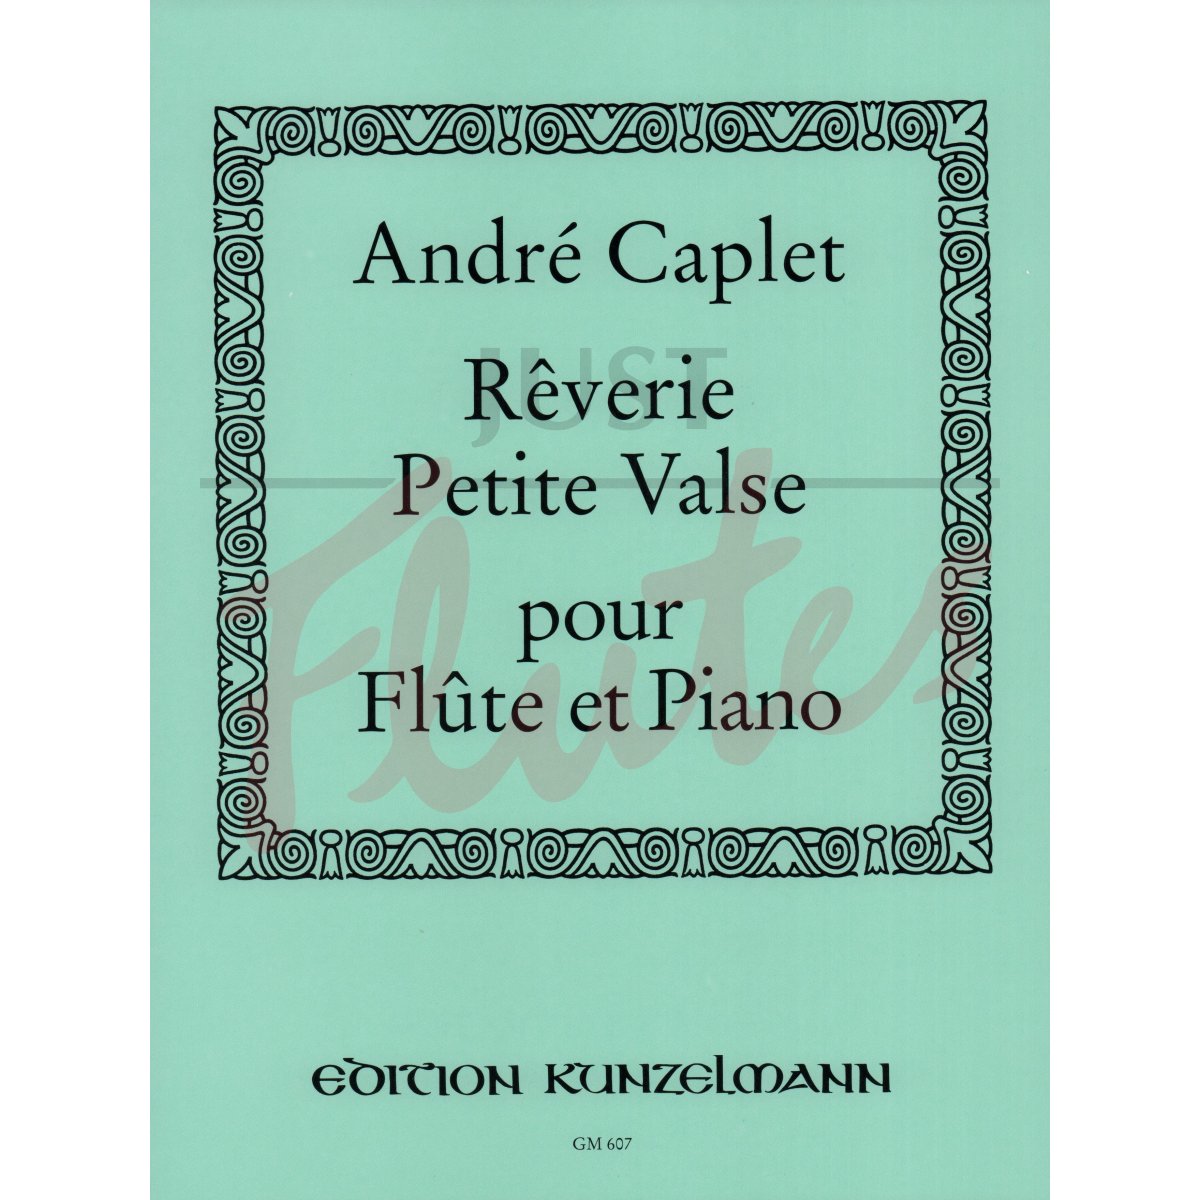 Rêverie and Petite Valse for Flute and Piano